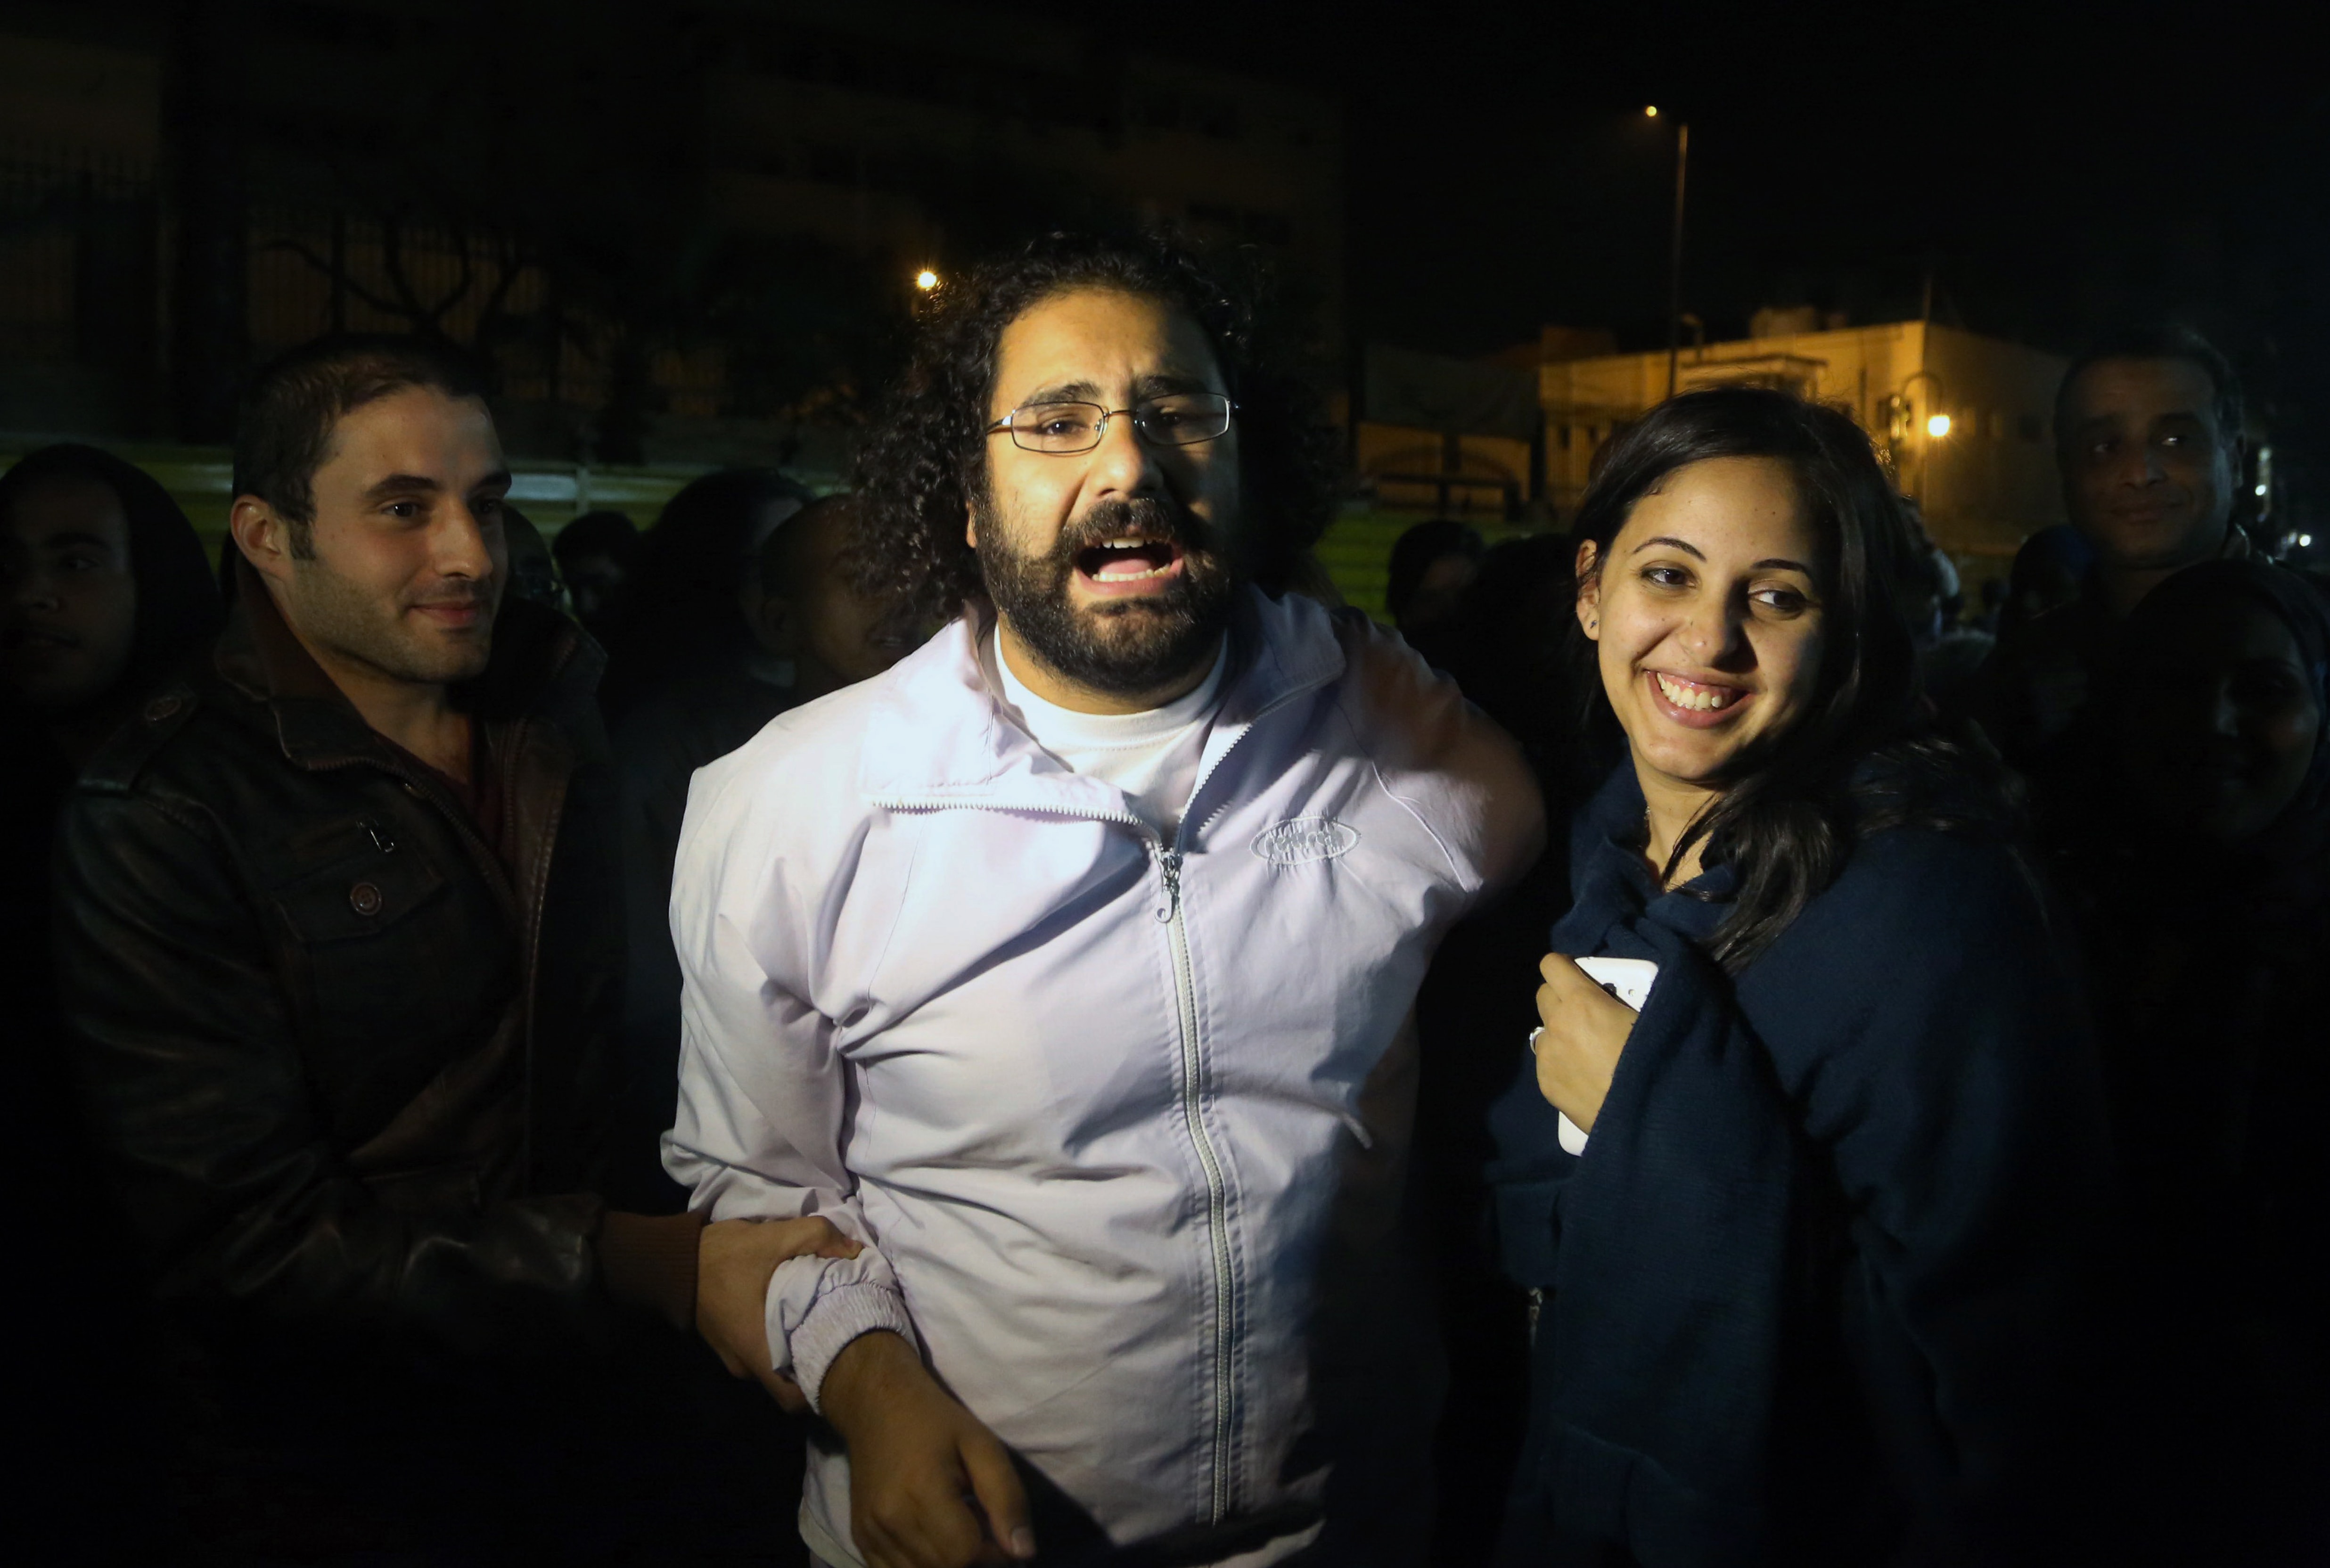 Alaa Abd El Fattah, center in white, is welcomed by his wife after he was released from the main central security office in Cairo on 23 March 2014, AP Photo/Roger Anis, El Shorouk Newspaper